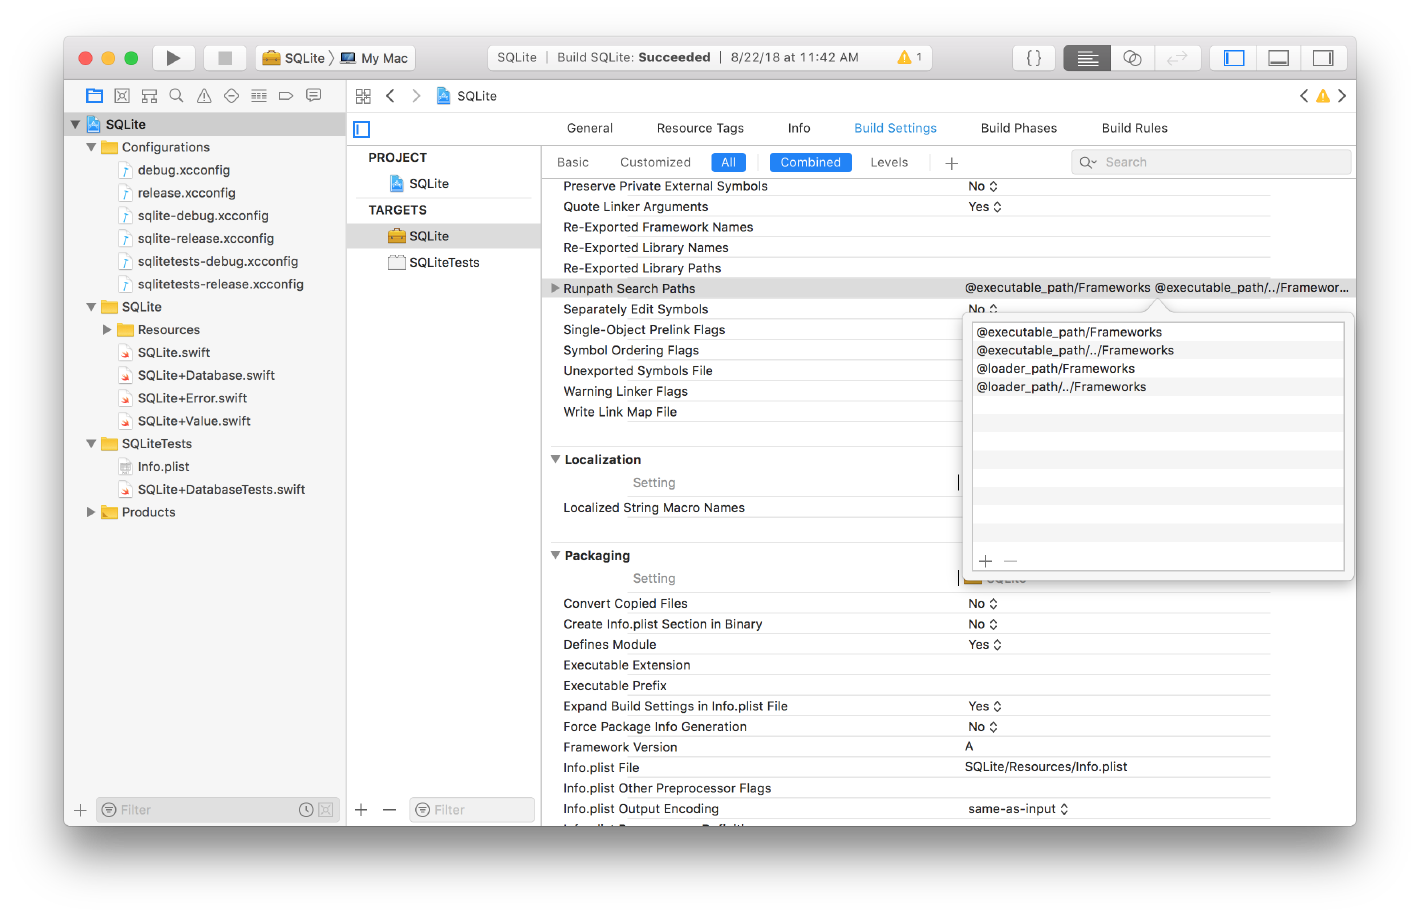 Screenshot of XCode with the SQLite project selected and showing the Build Settings with the Runpath Search Paths build setting value expanded